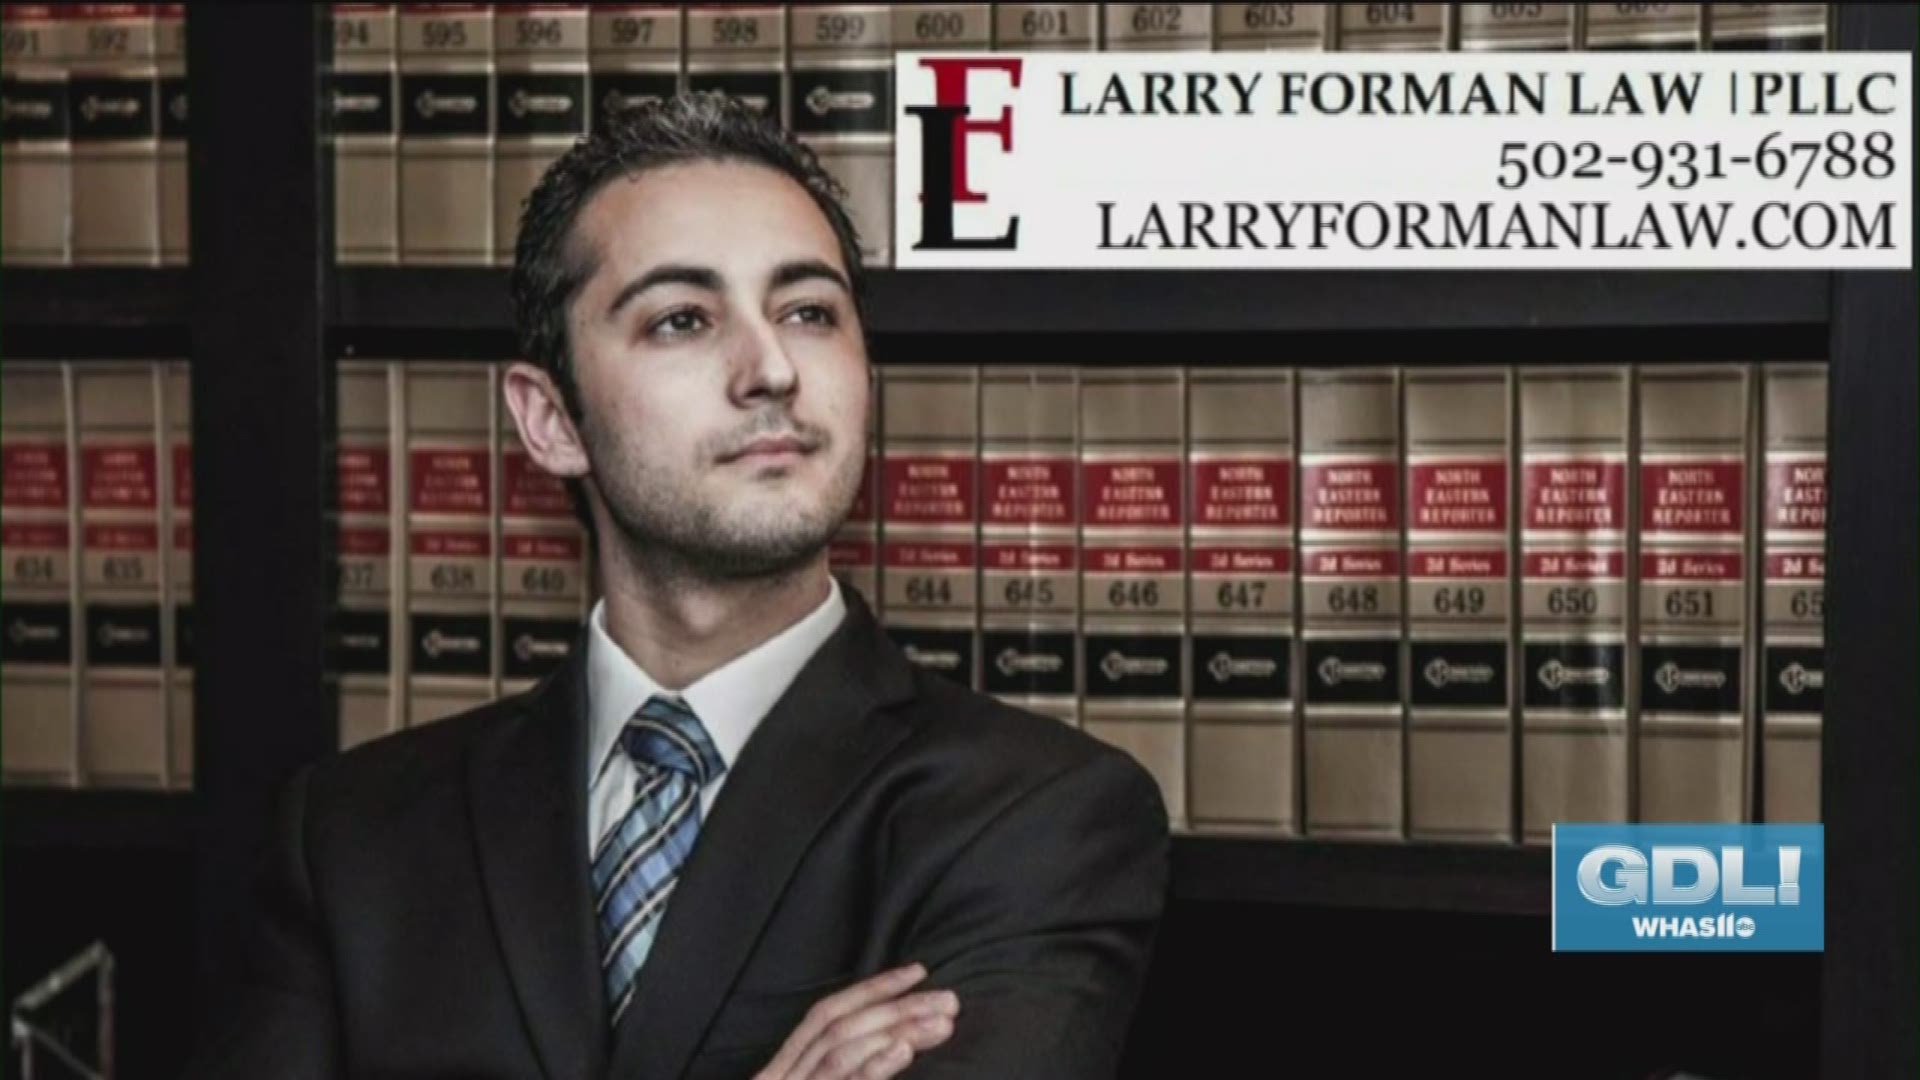 Larry Forman is a lawyer who is primarily focused on DUI charges. If you get a DUI, Larry Forman Law can help, just call 502-931-6788.